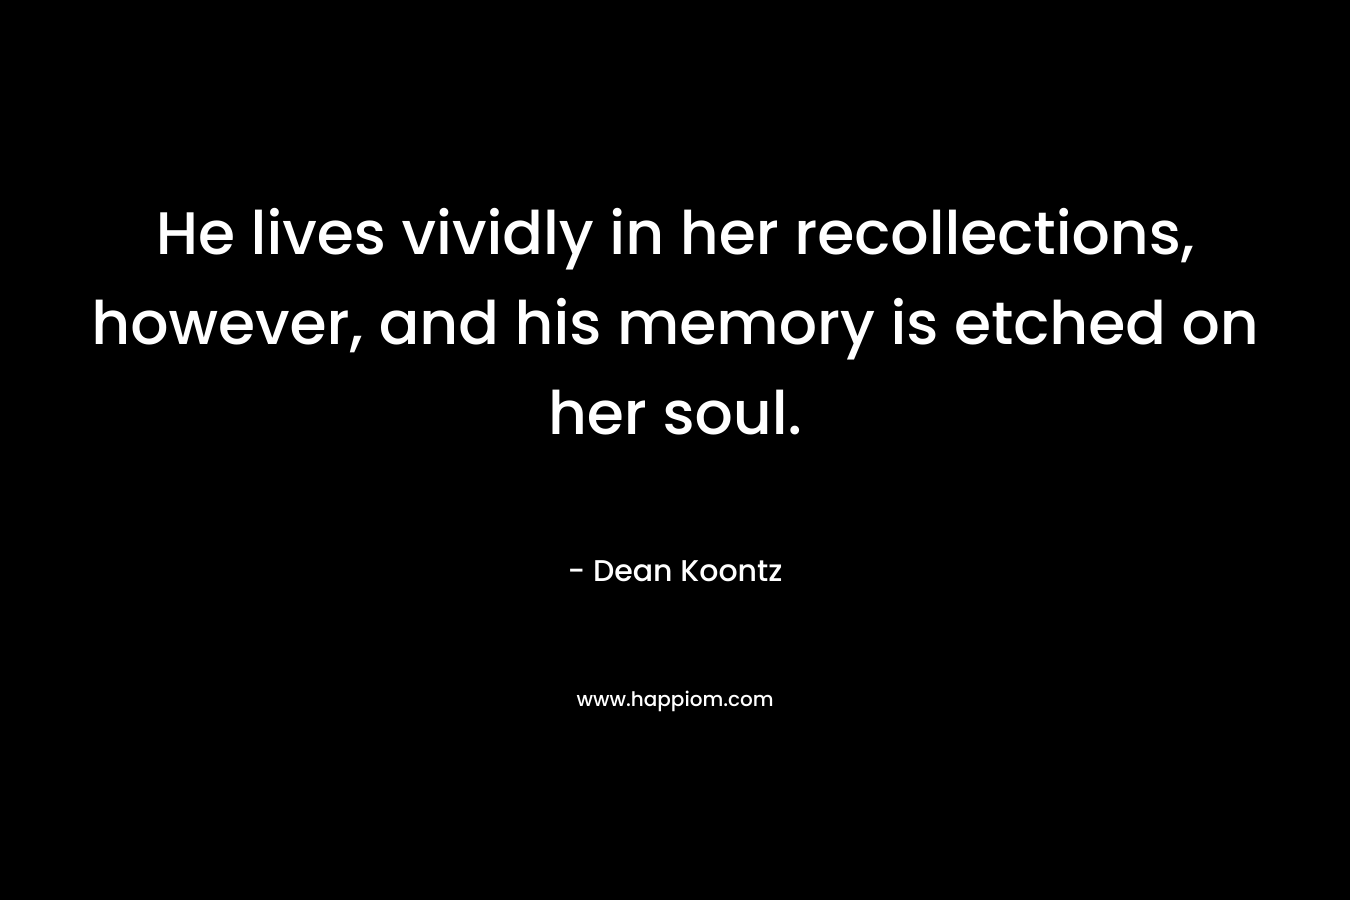 He lives vividly in her recollections, however, and his memory is etched on her soul. – Dean Koontz